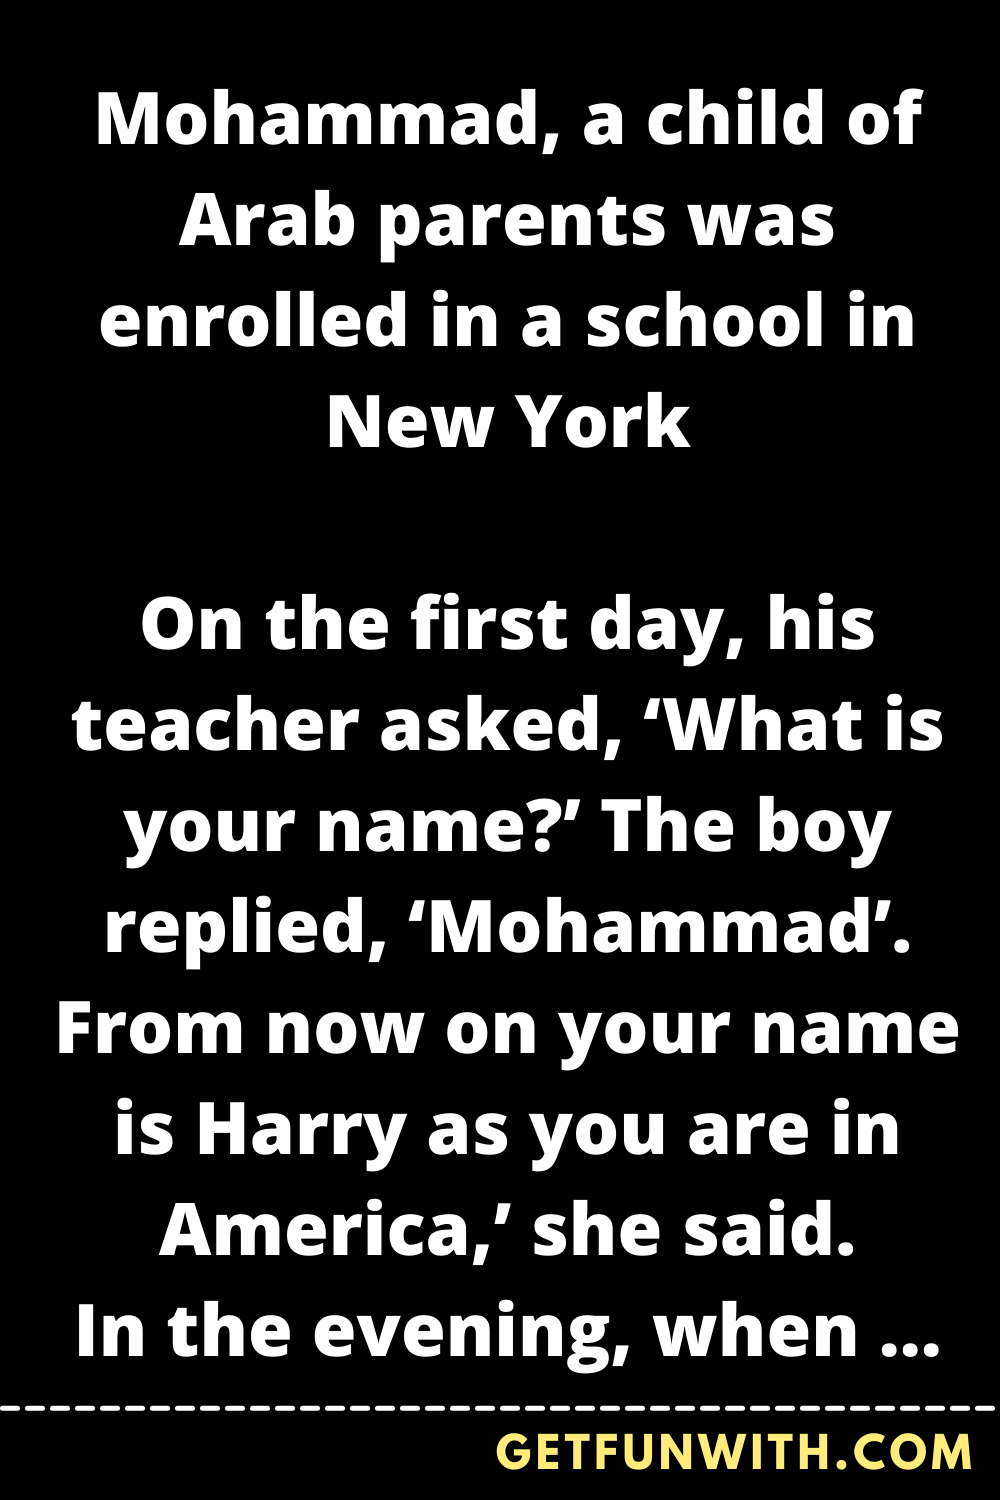 Mohammad, a child of Arab parents was enrolled in a school in New York